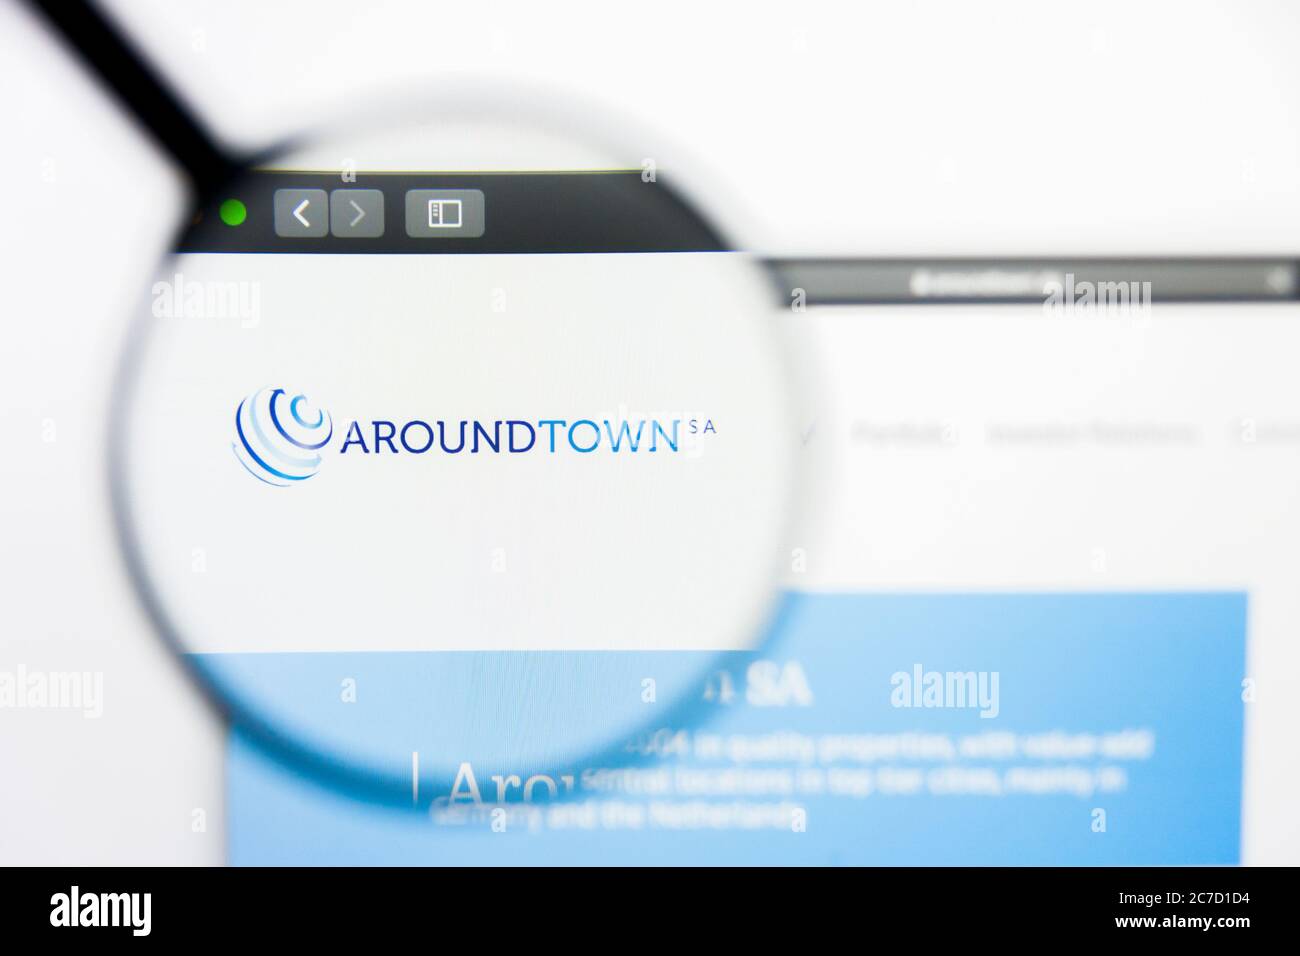 Los Angeles, California, USA - 25 March 2019: Illustrative Editorial of Aroundtown website homepage. Aroundtown logo visible on display screen. Stock Photo